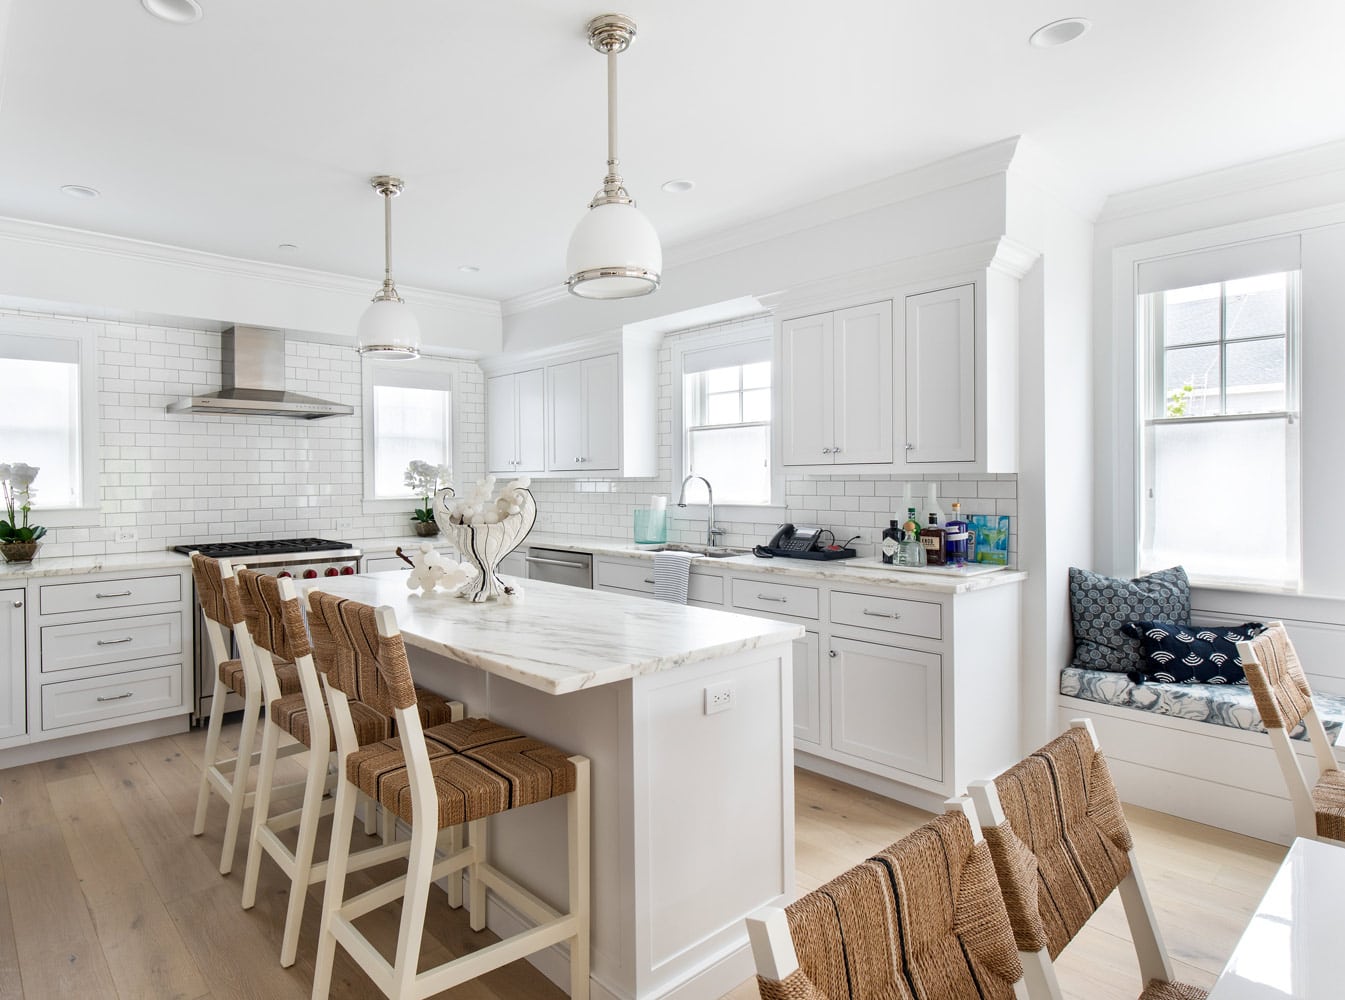 Hamptons boathouse kitchen designed by Annette Jaffe Interiors